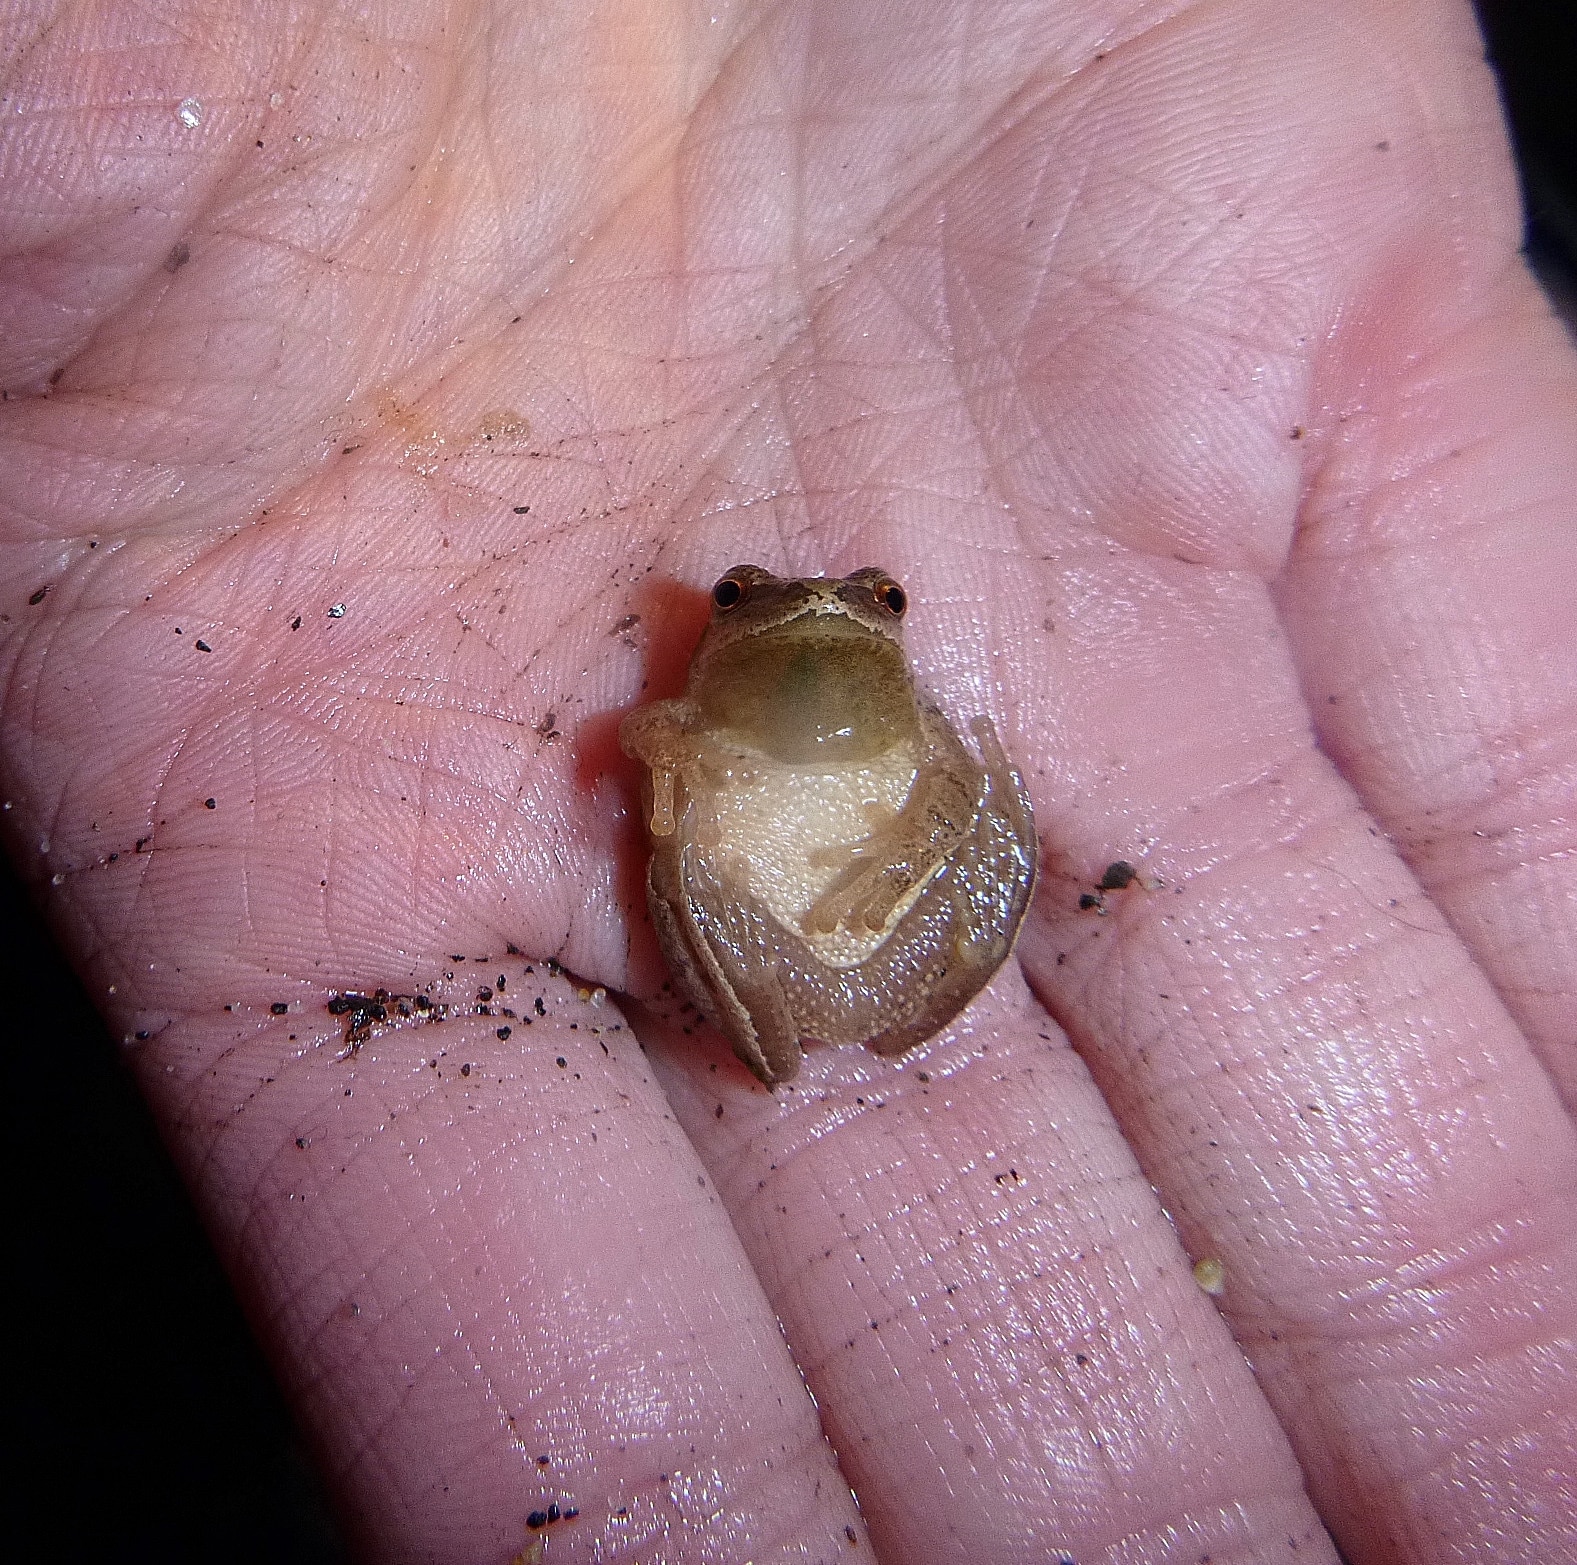 A spring peeper exposes its soft underside. (photo © Cheryl Martin)